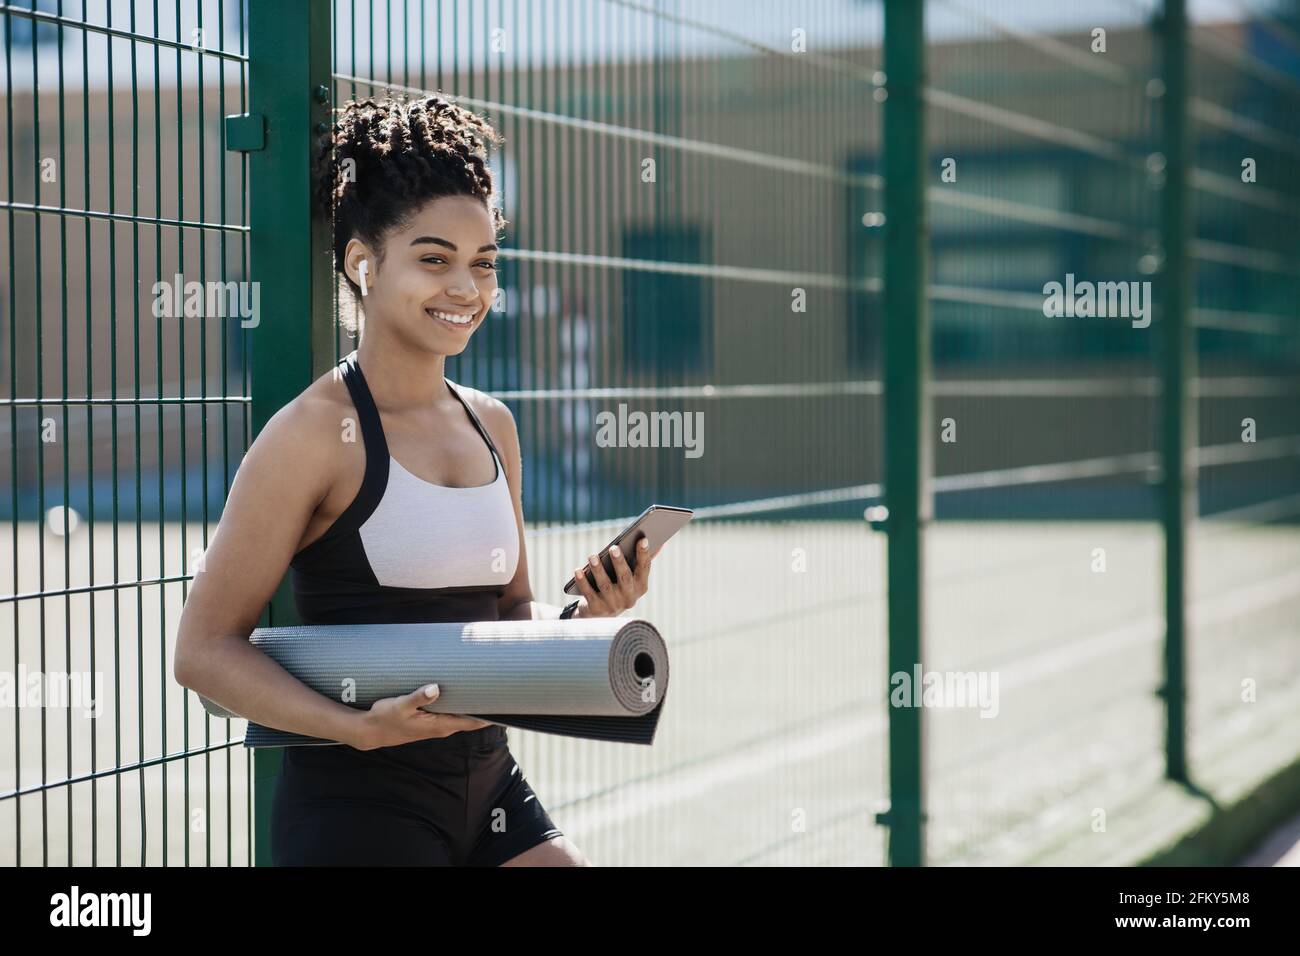 Healthy active lifestyle and workout outdoor at stadium Stock Photo